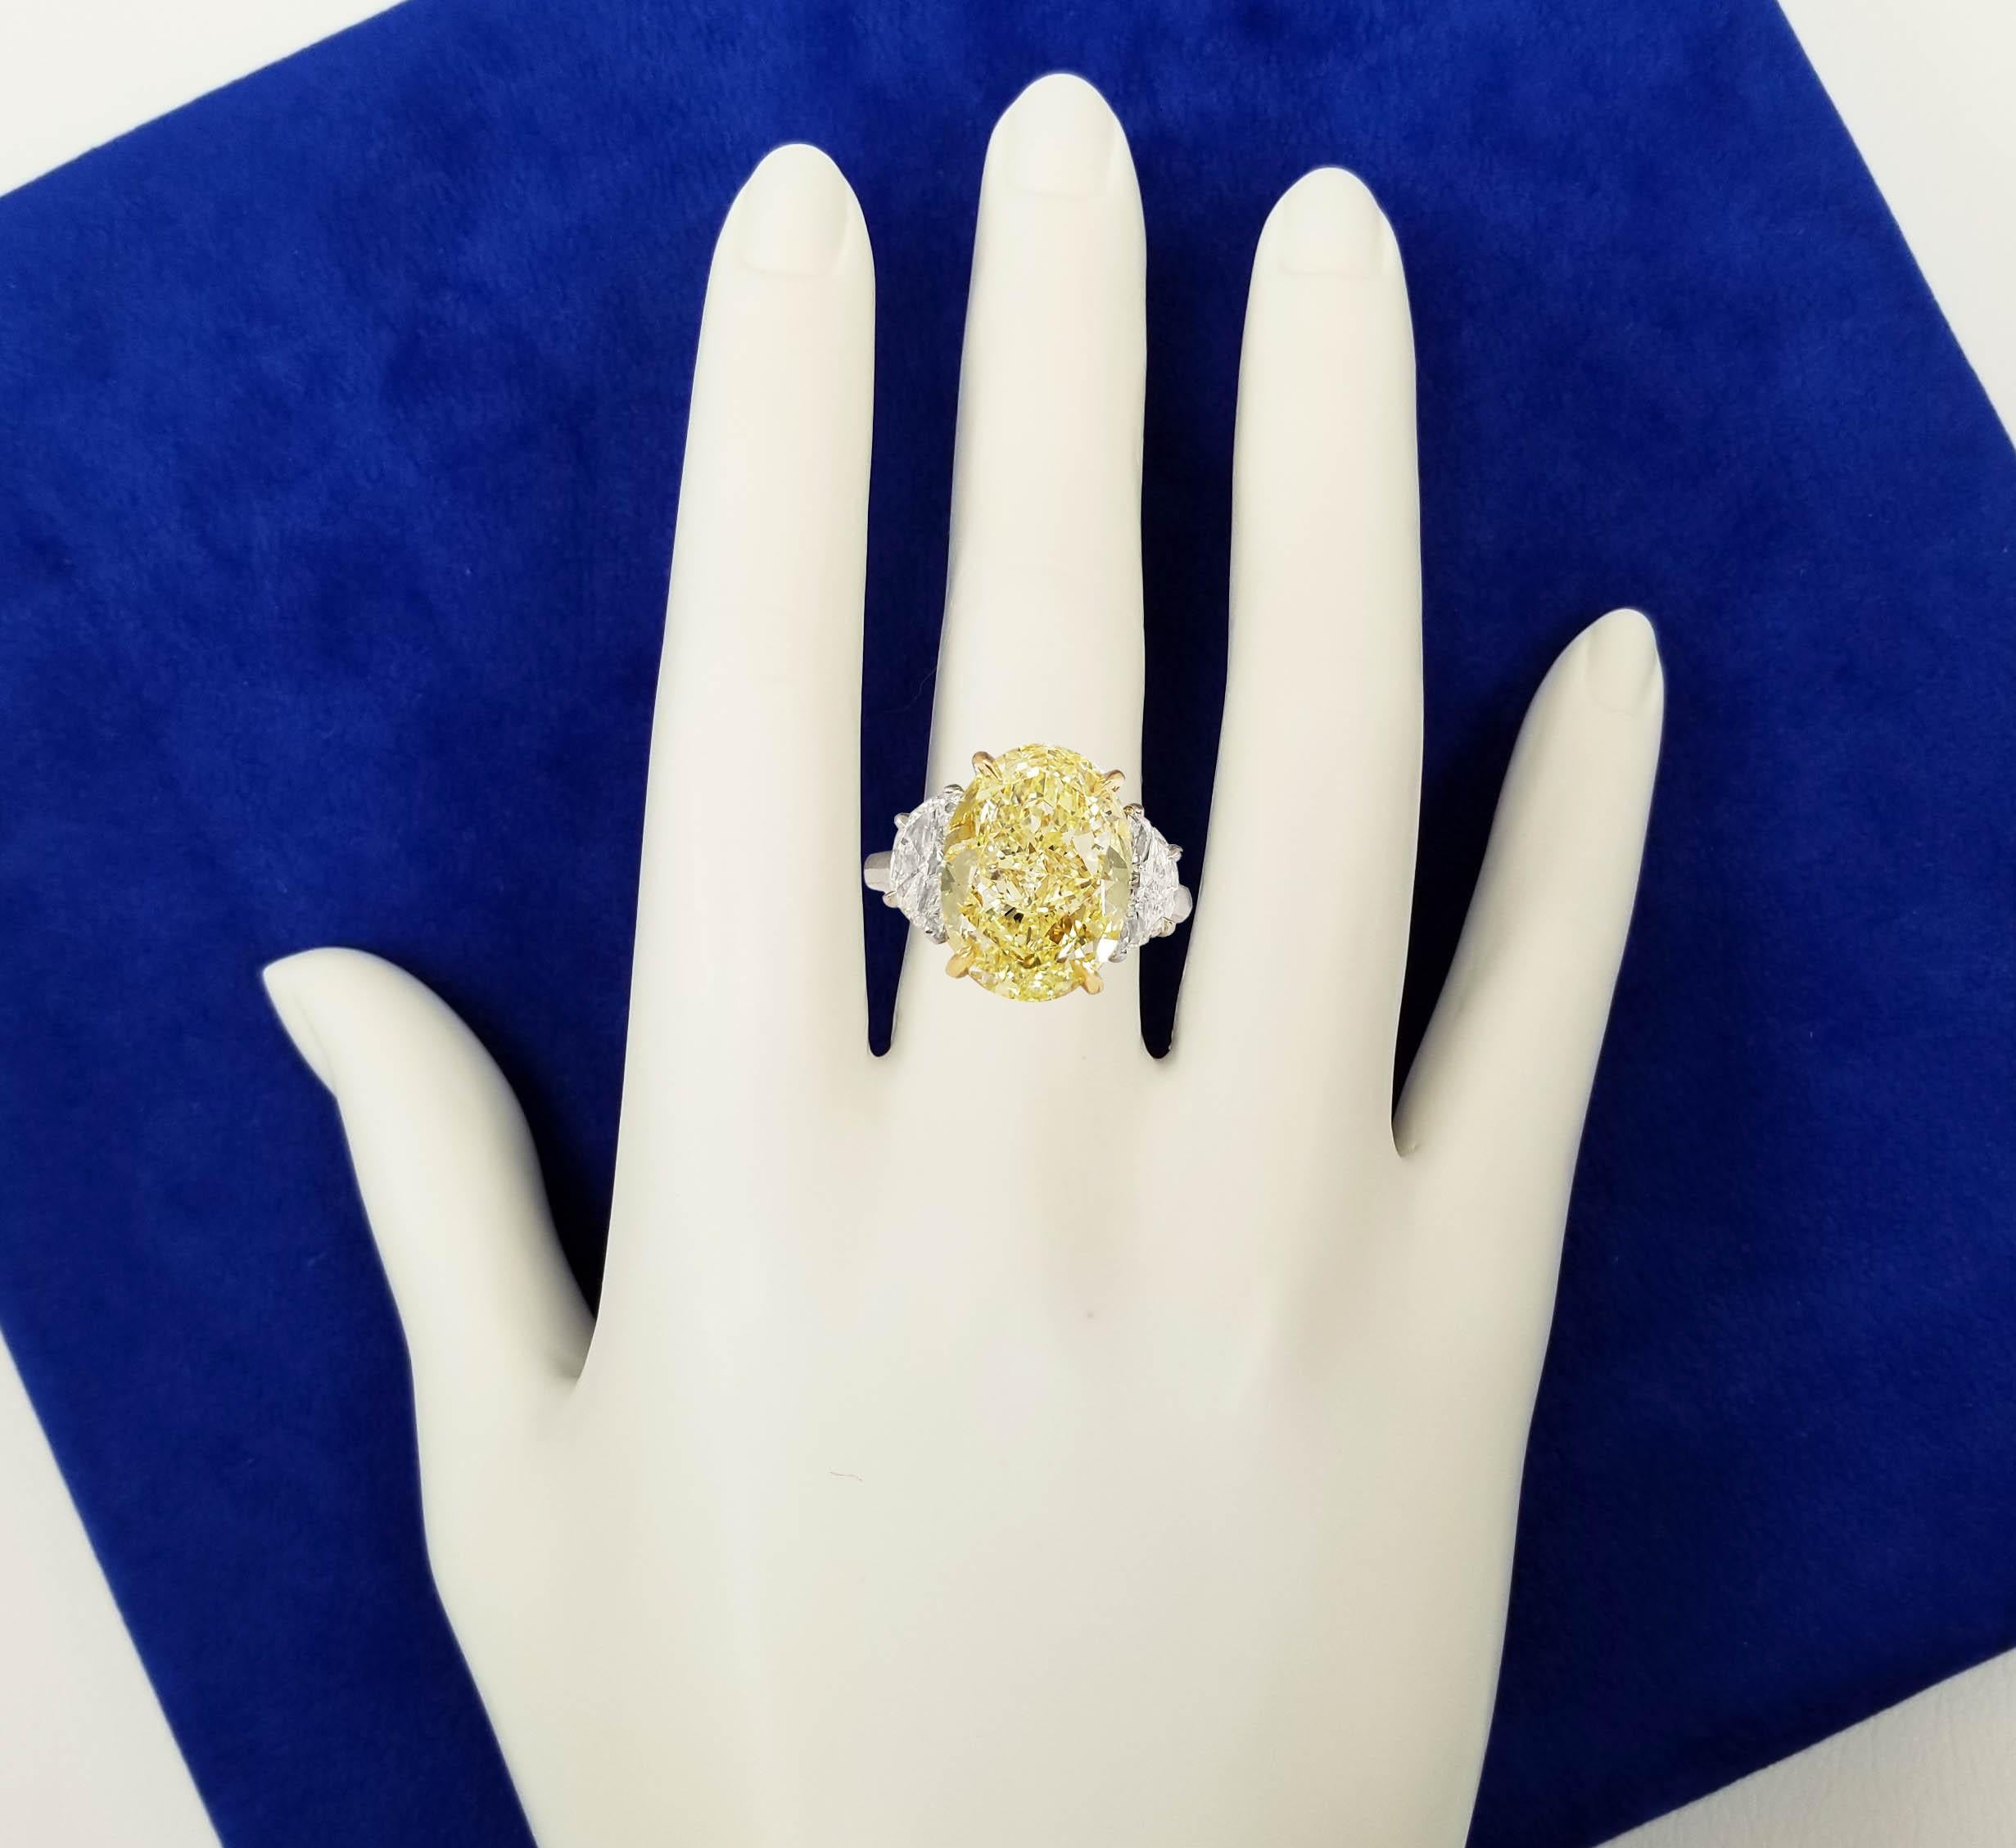 Women's Scarselli Engagement Ring 7 Carat Fancy Yellow Oval Diamond GIA Certified